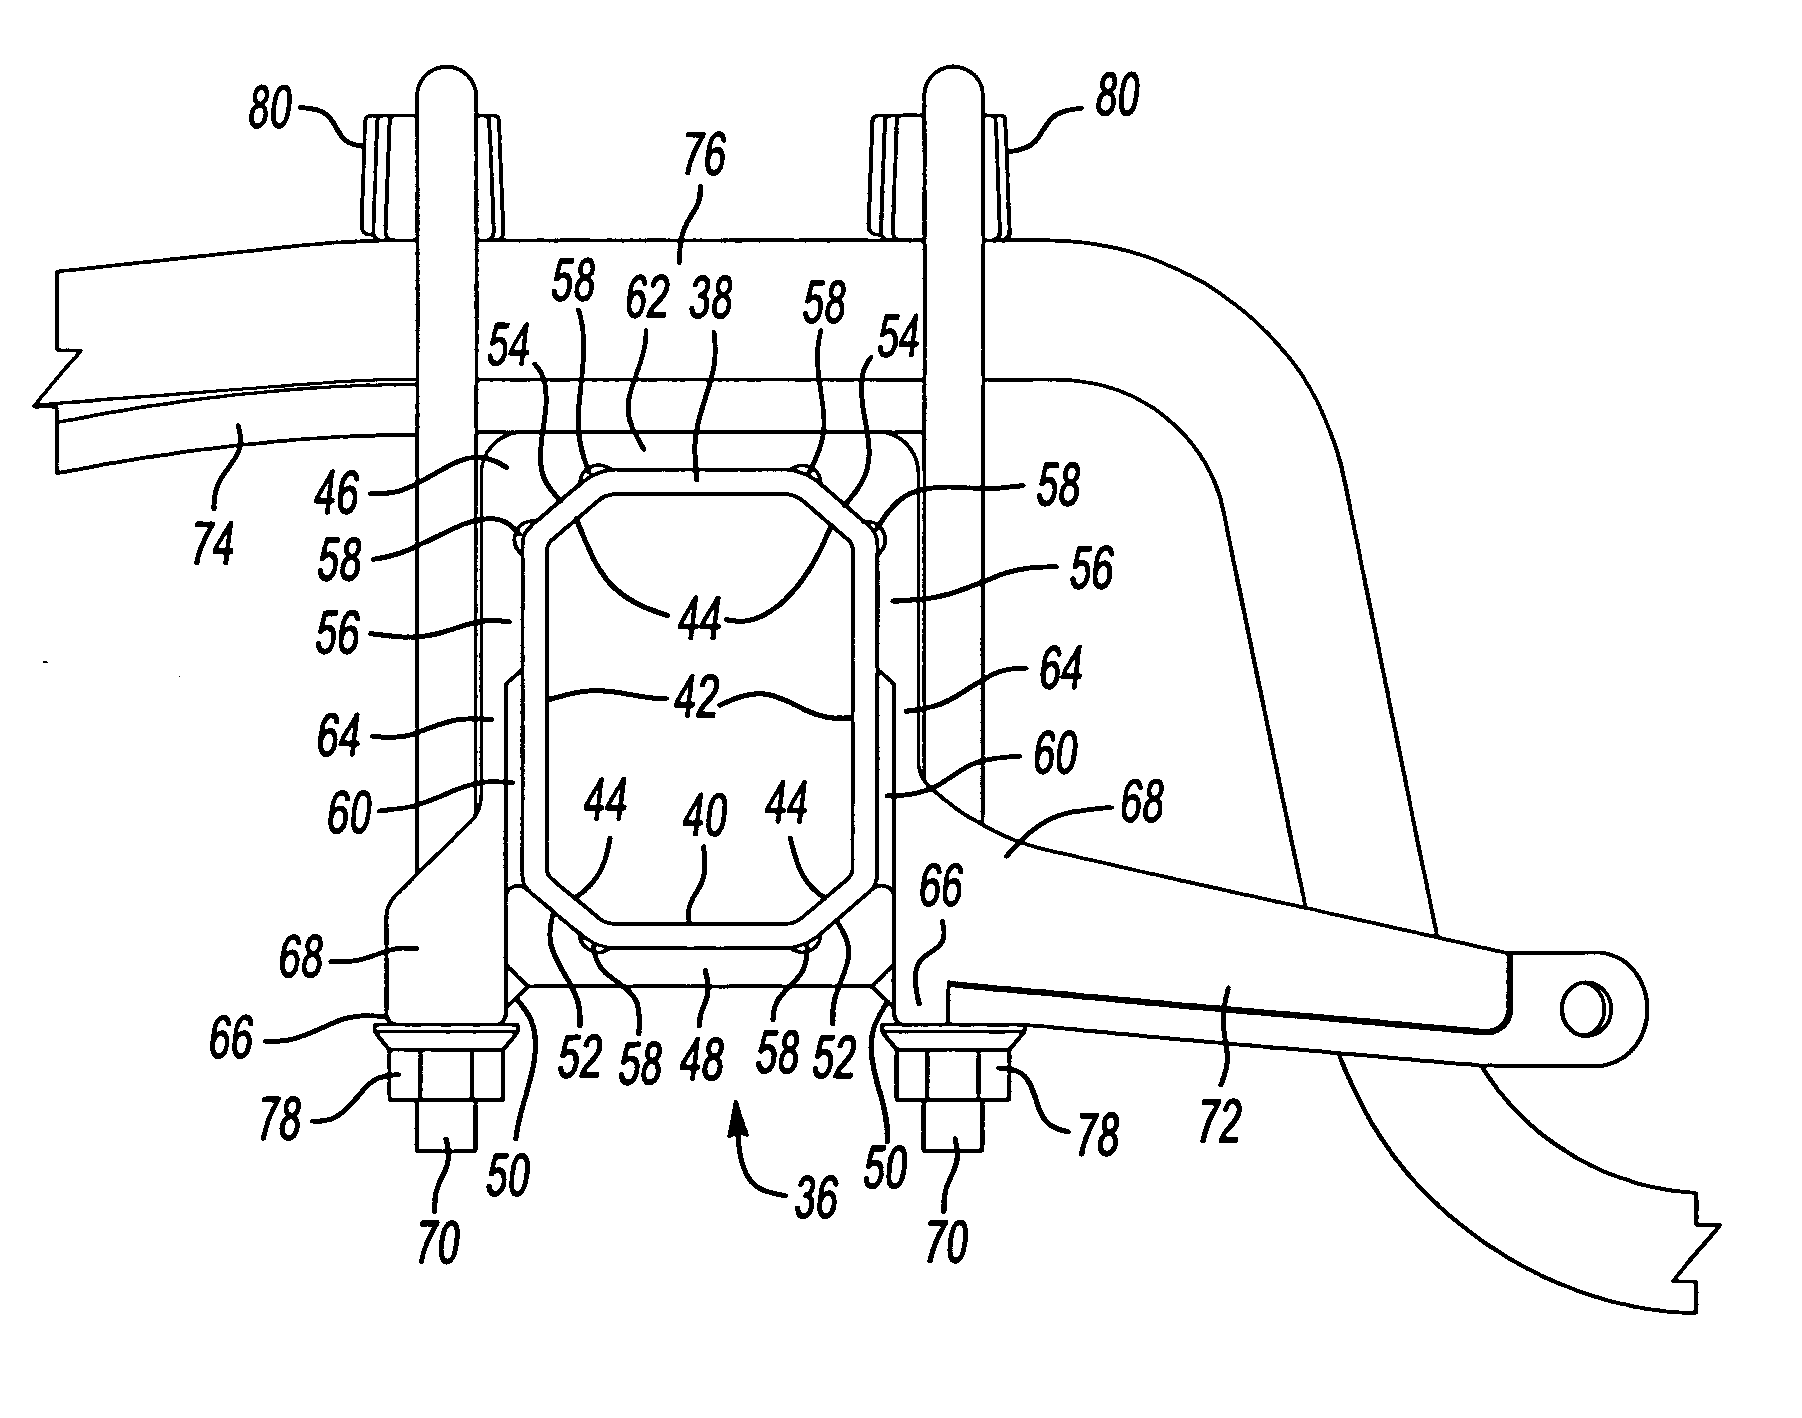 Preloaded suspension bracket assembly for axle housing